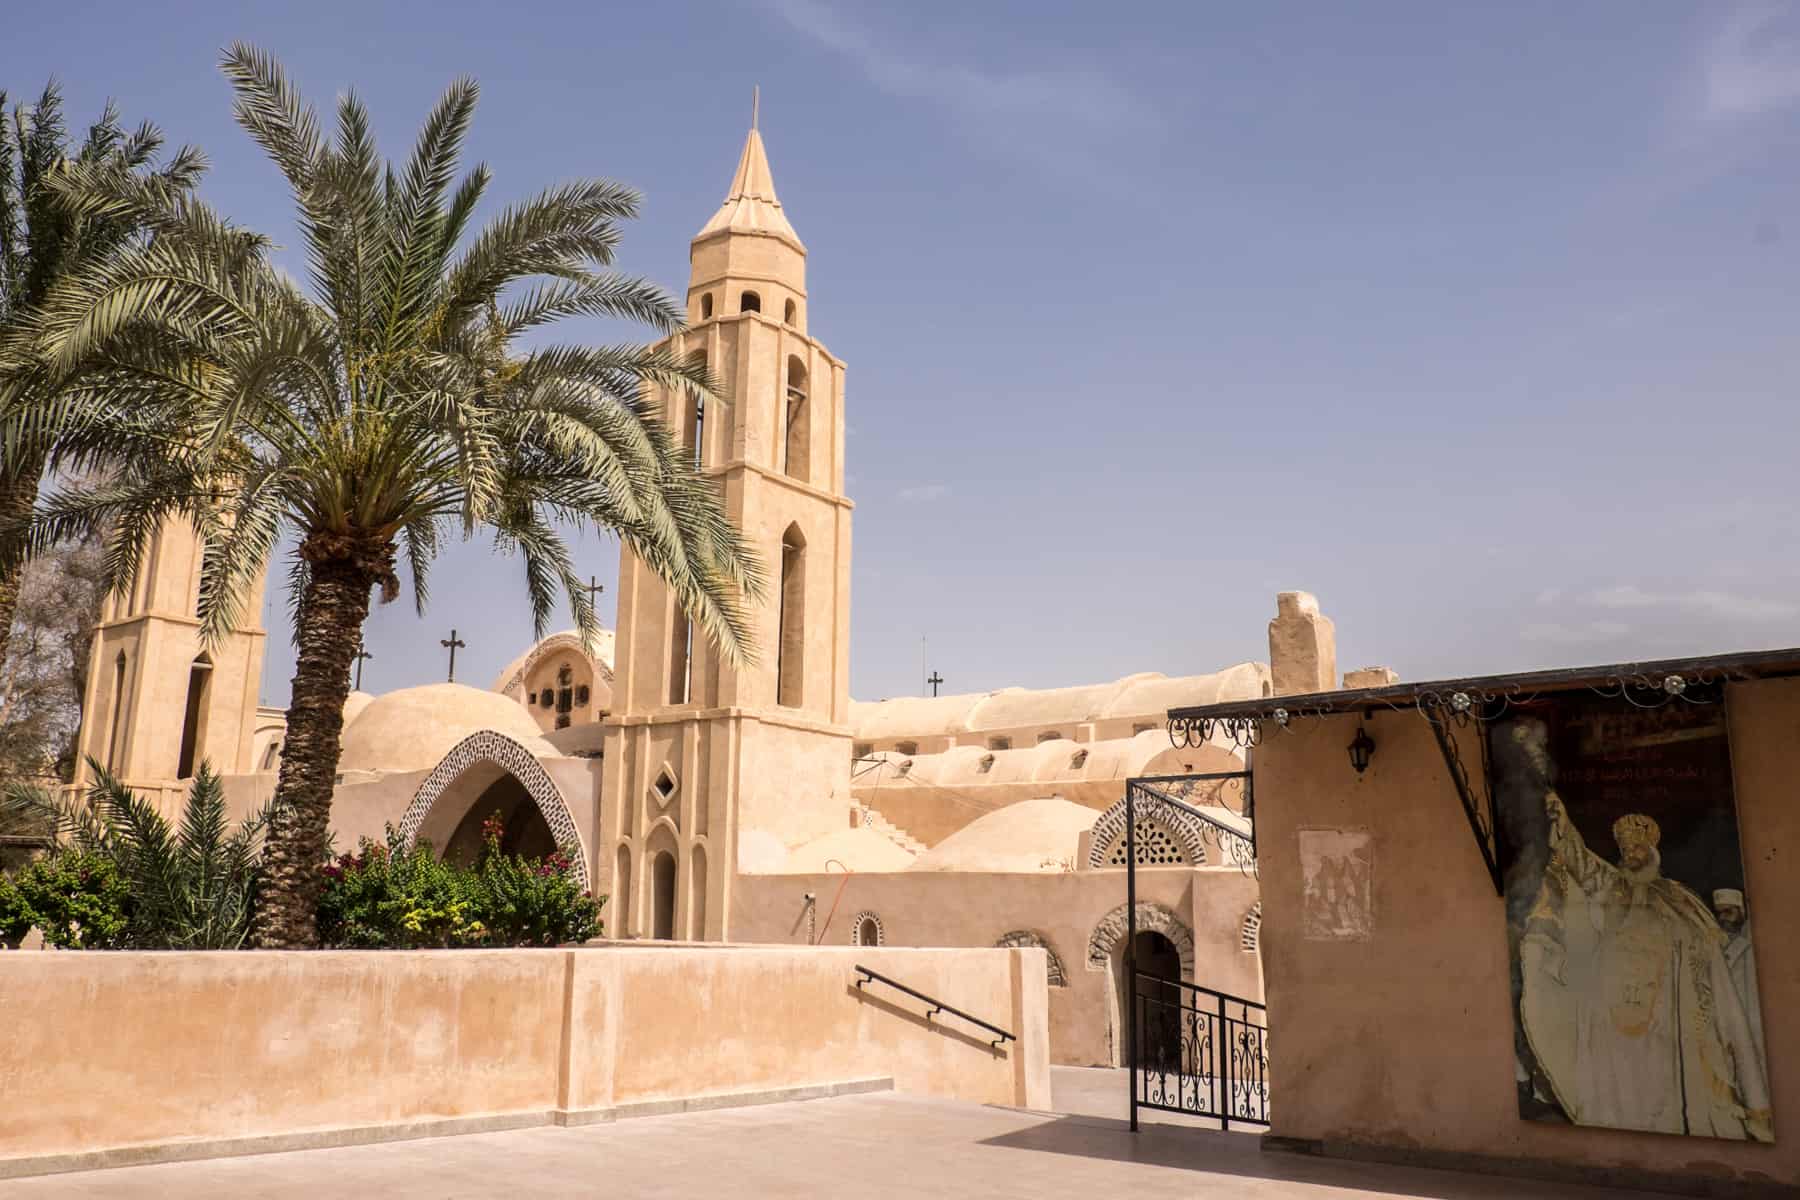 The light pastal exterior filled with palm trees of the Monasteries of Wadi Natrun Egypt